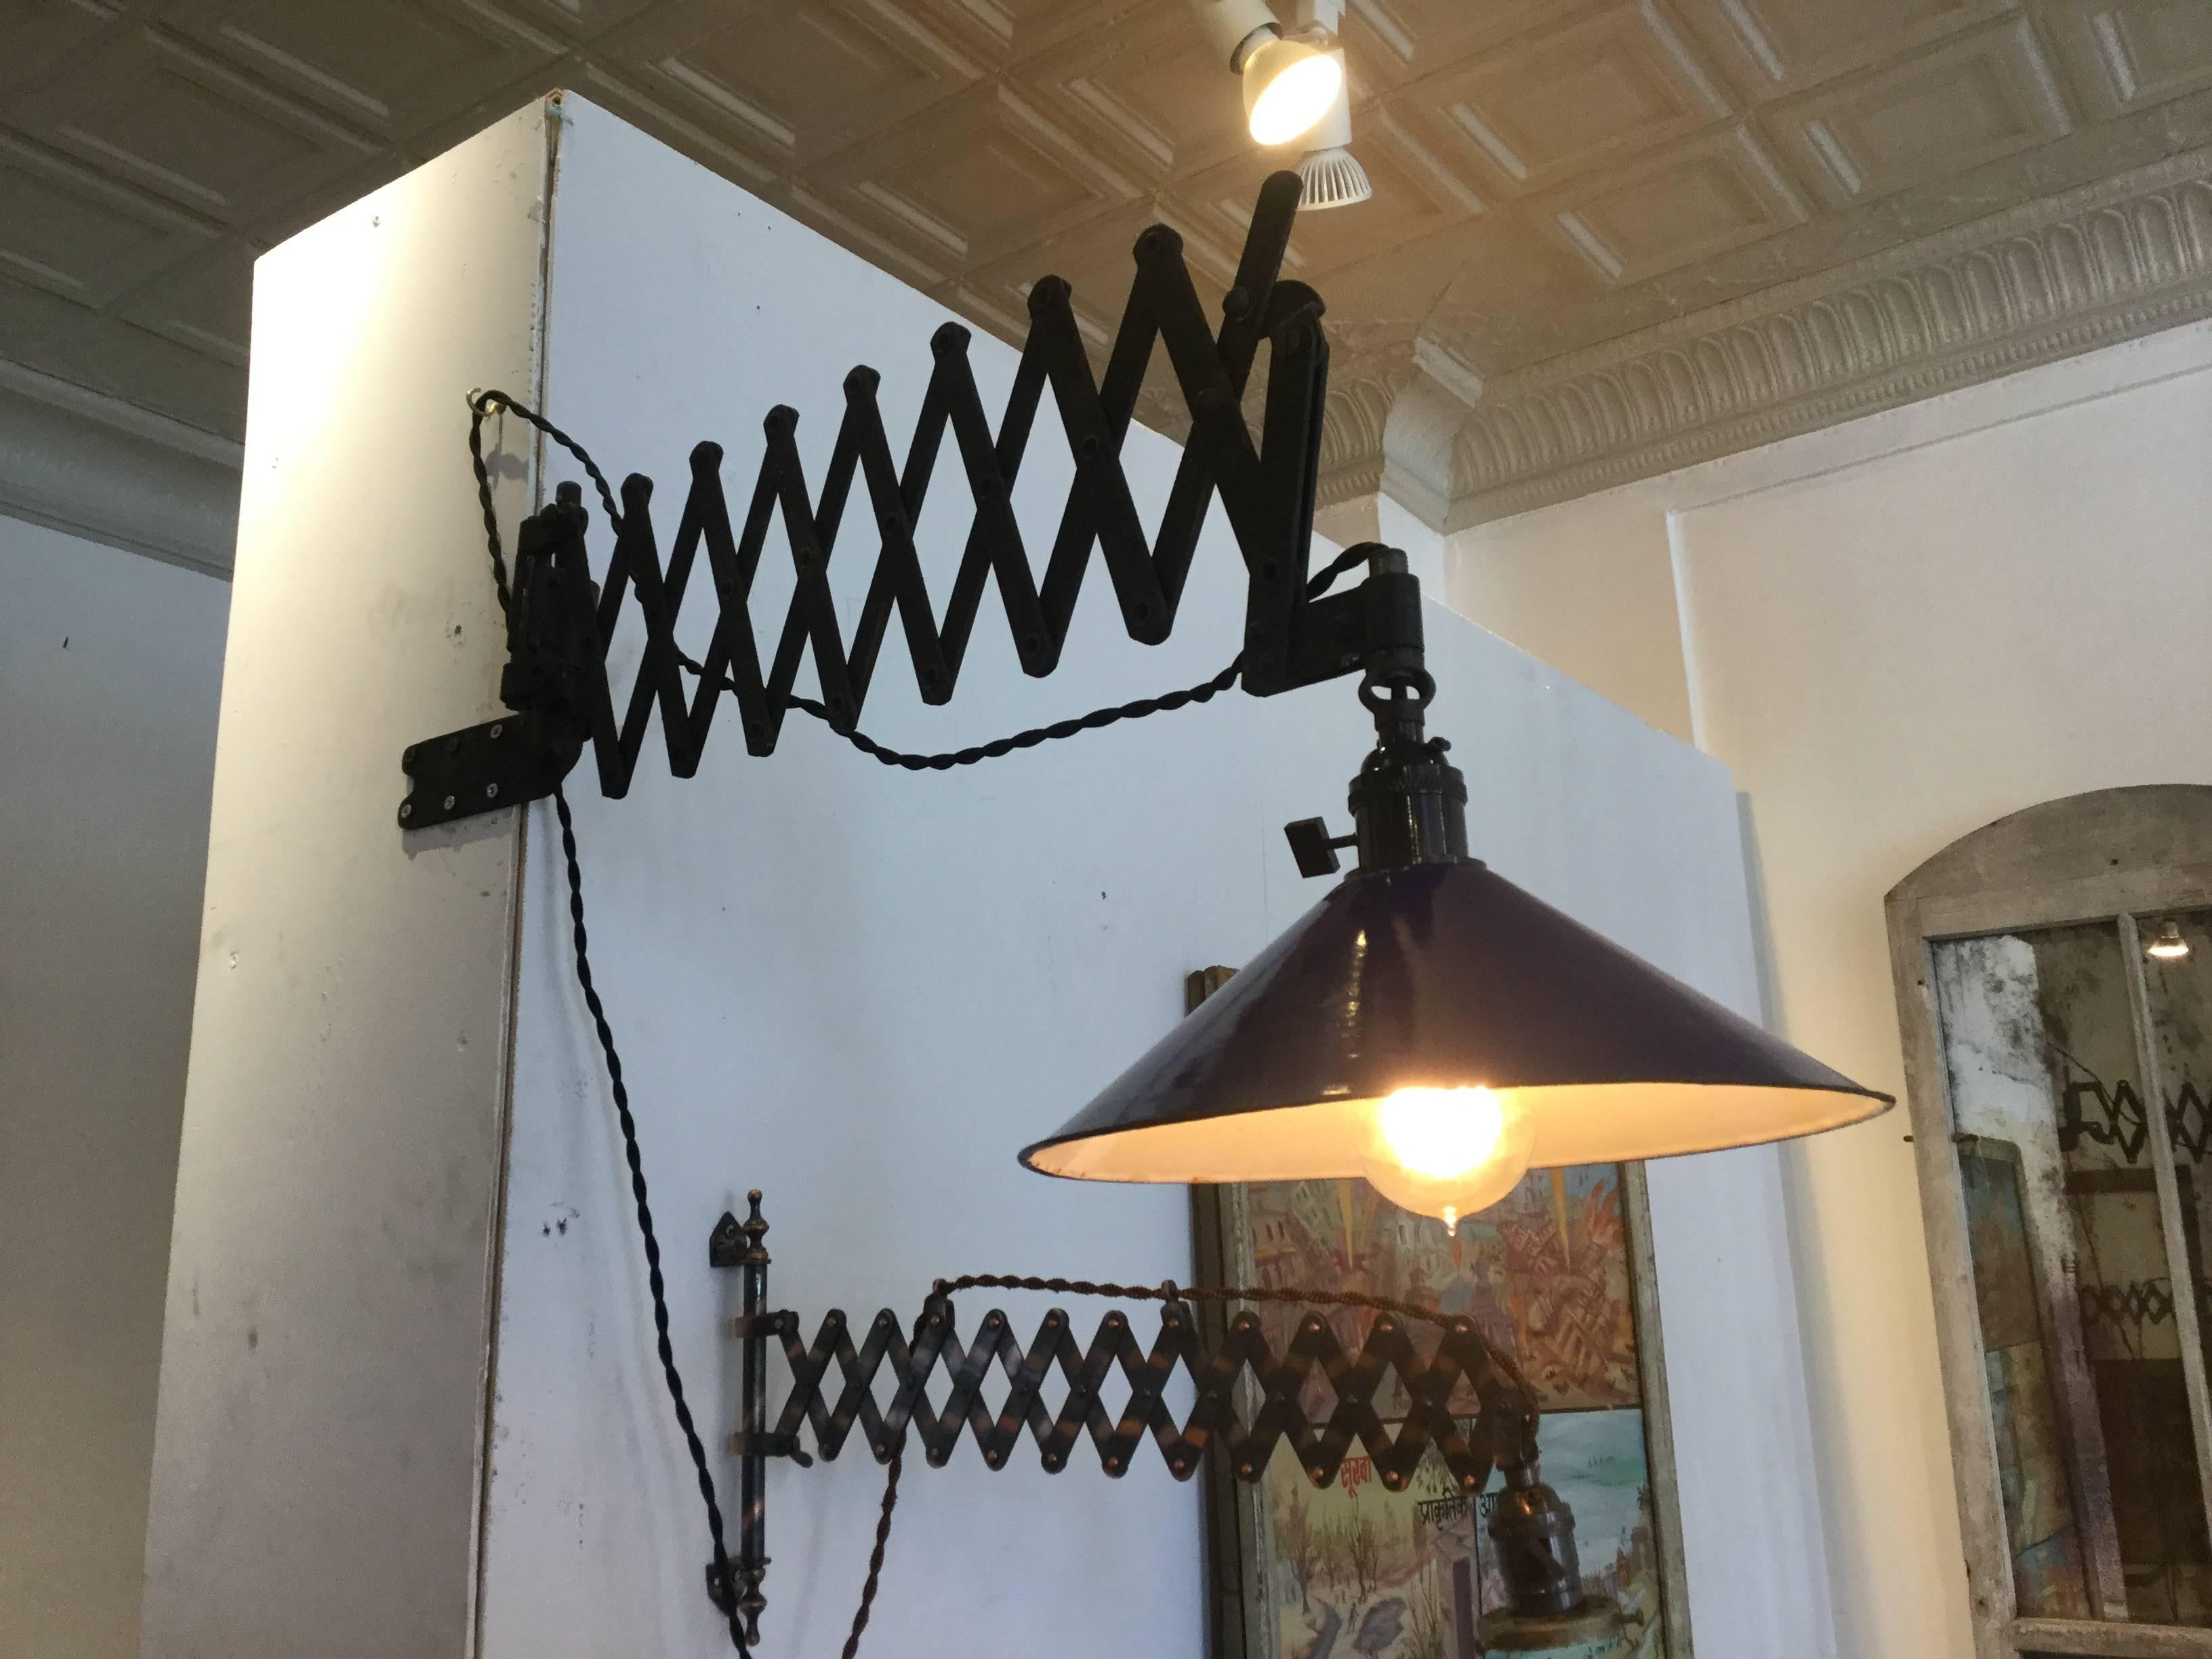 Original Industrial Scissor or accordion lamp, circa 1910. This has a blue enamel shade. The arm retracts and swivels.